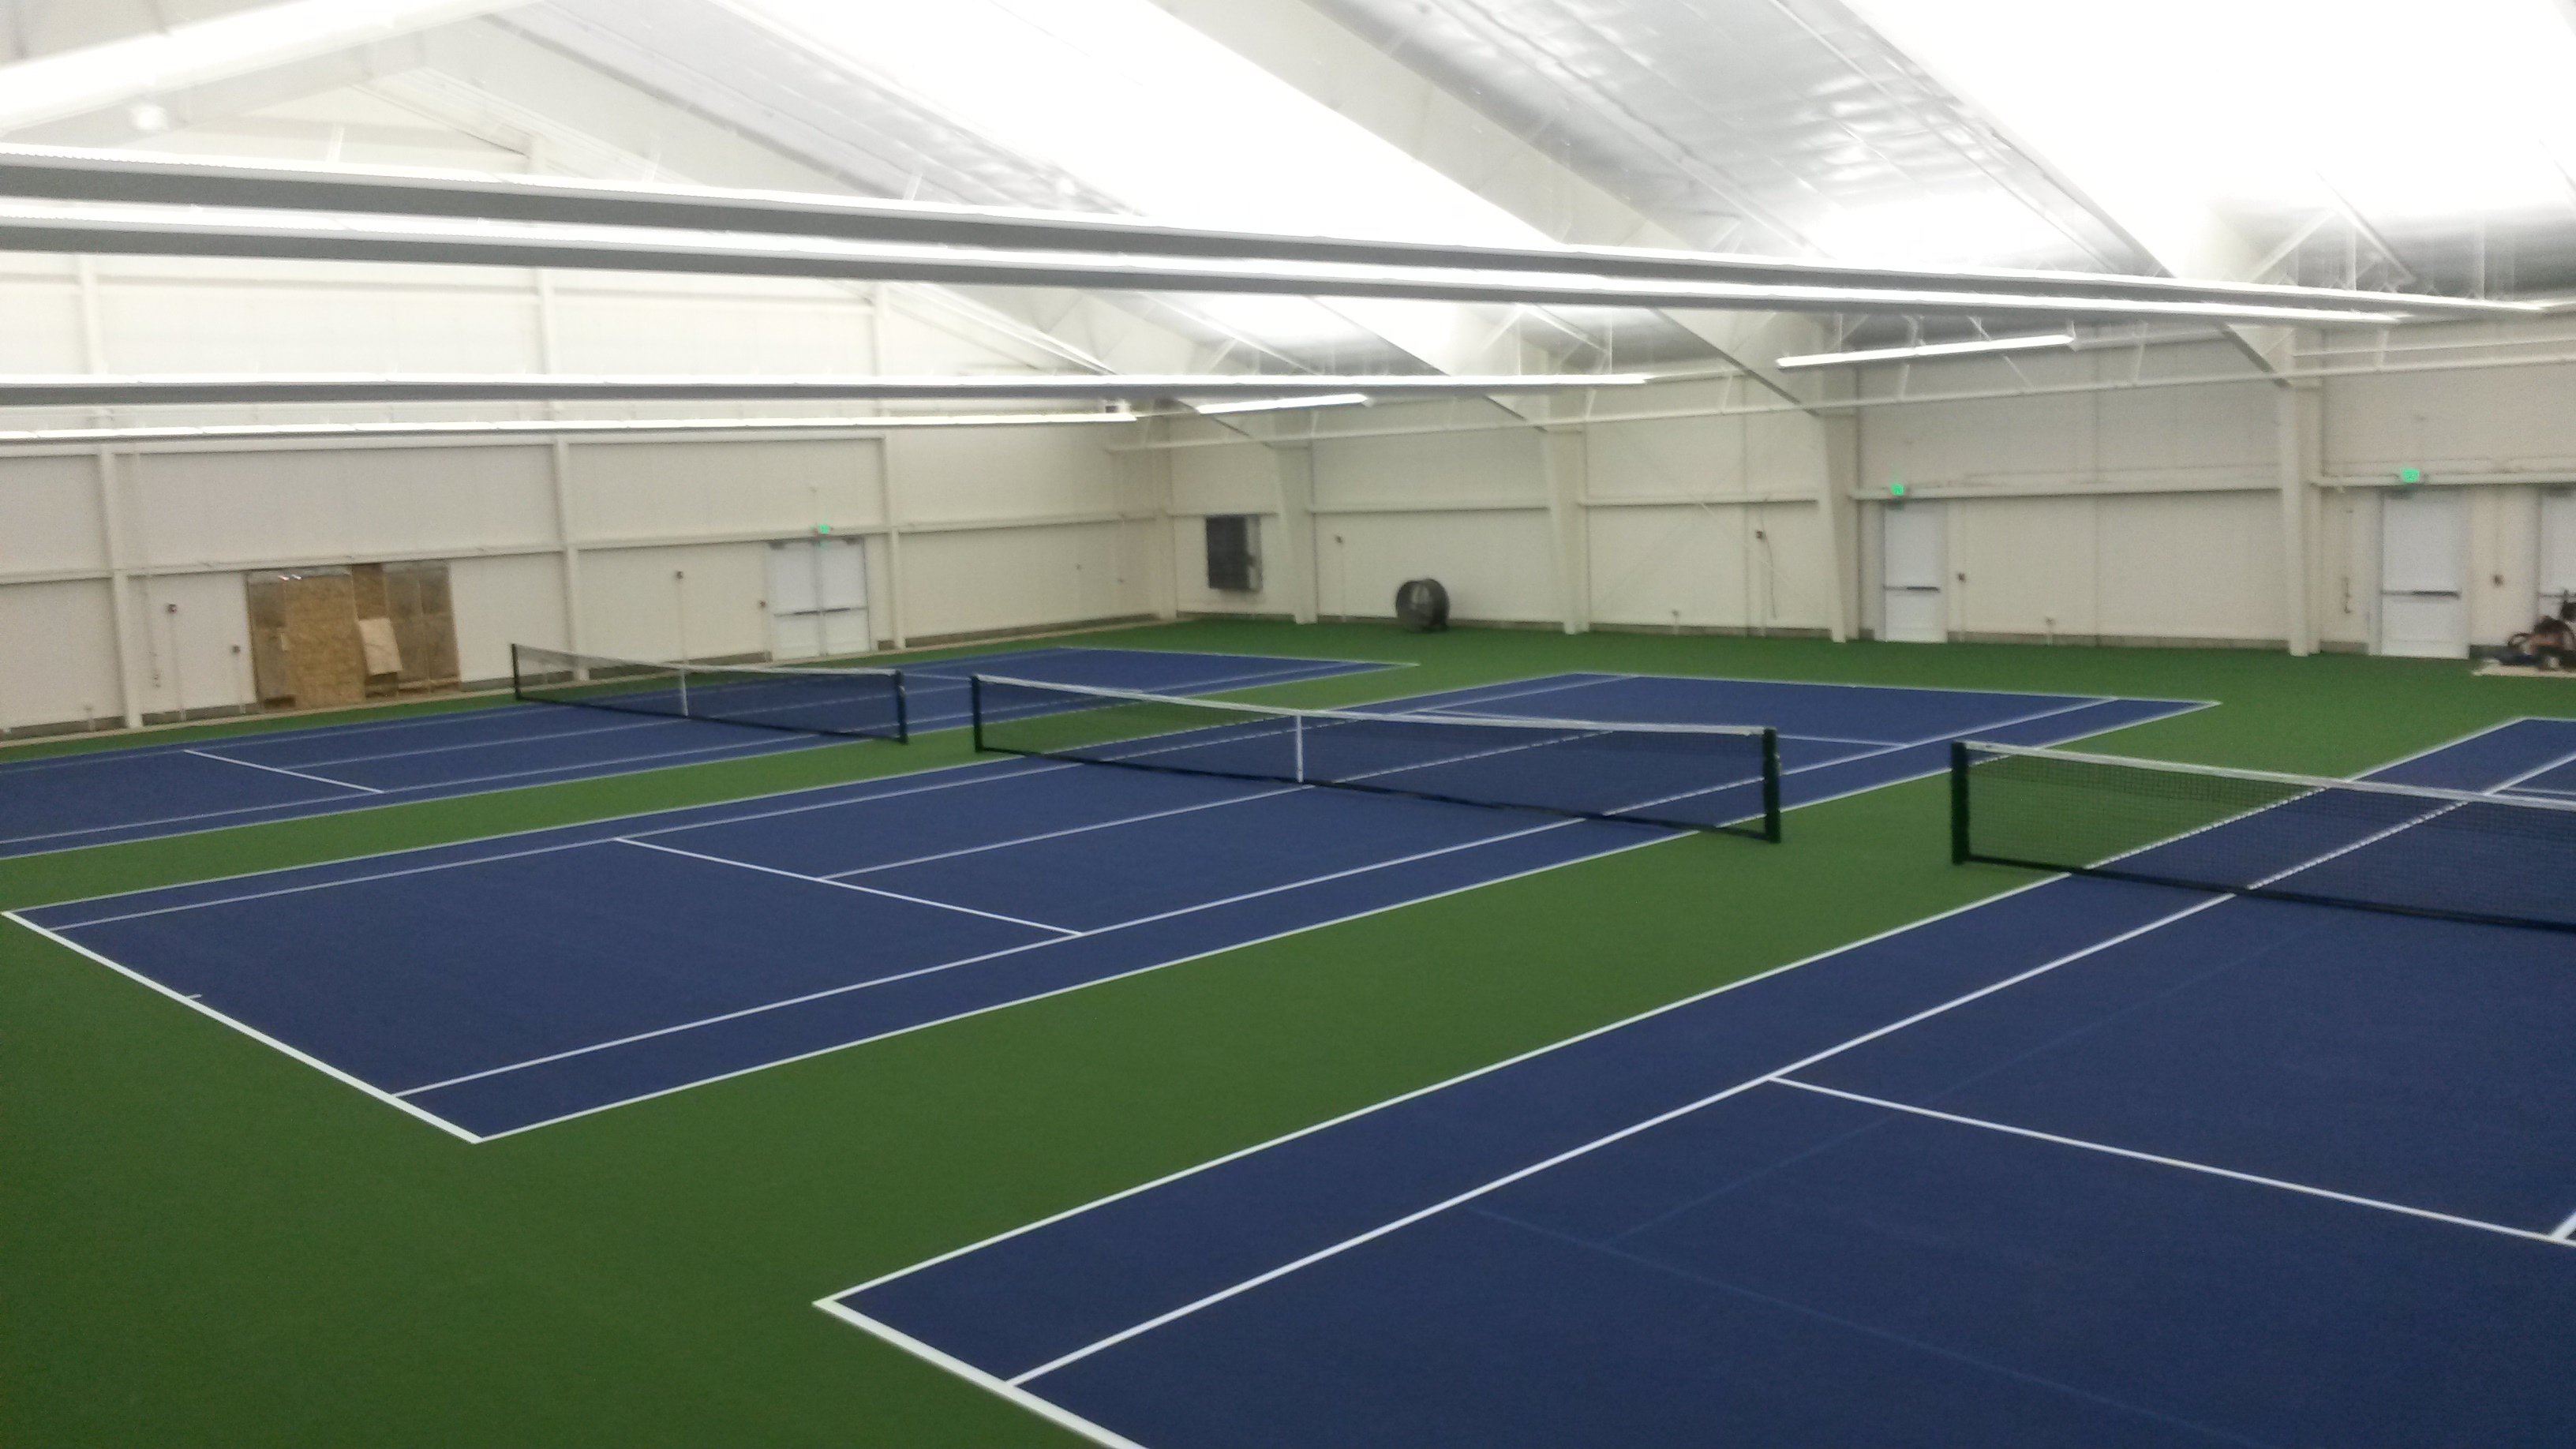 International Tennis Hall of Fame Honors ThinkLite as its Energy